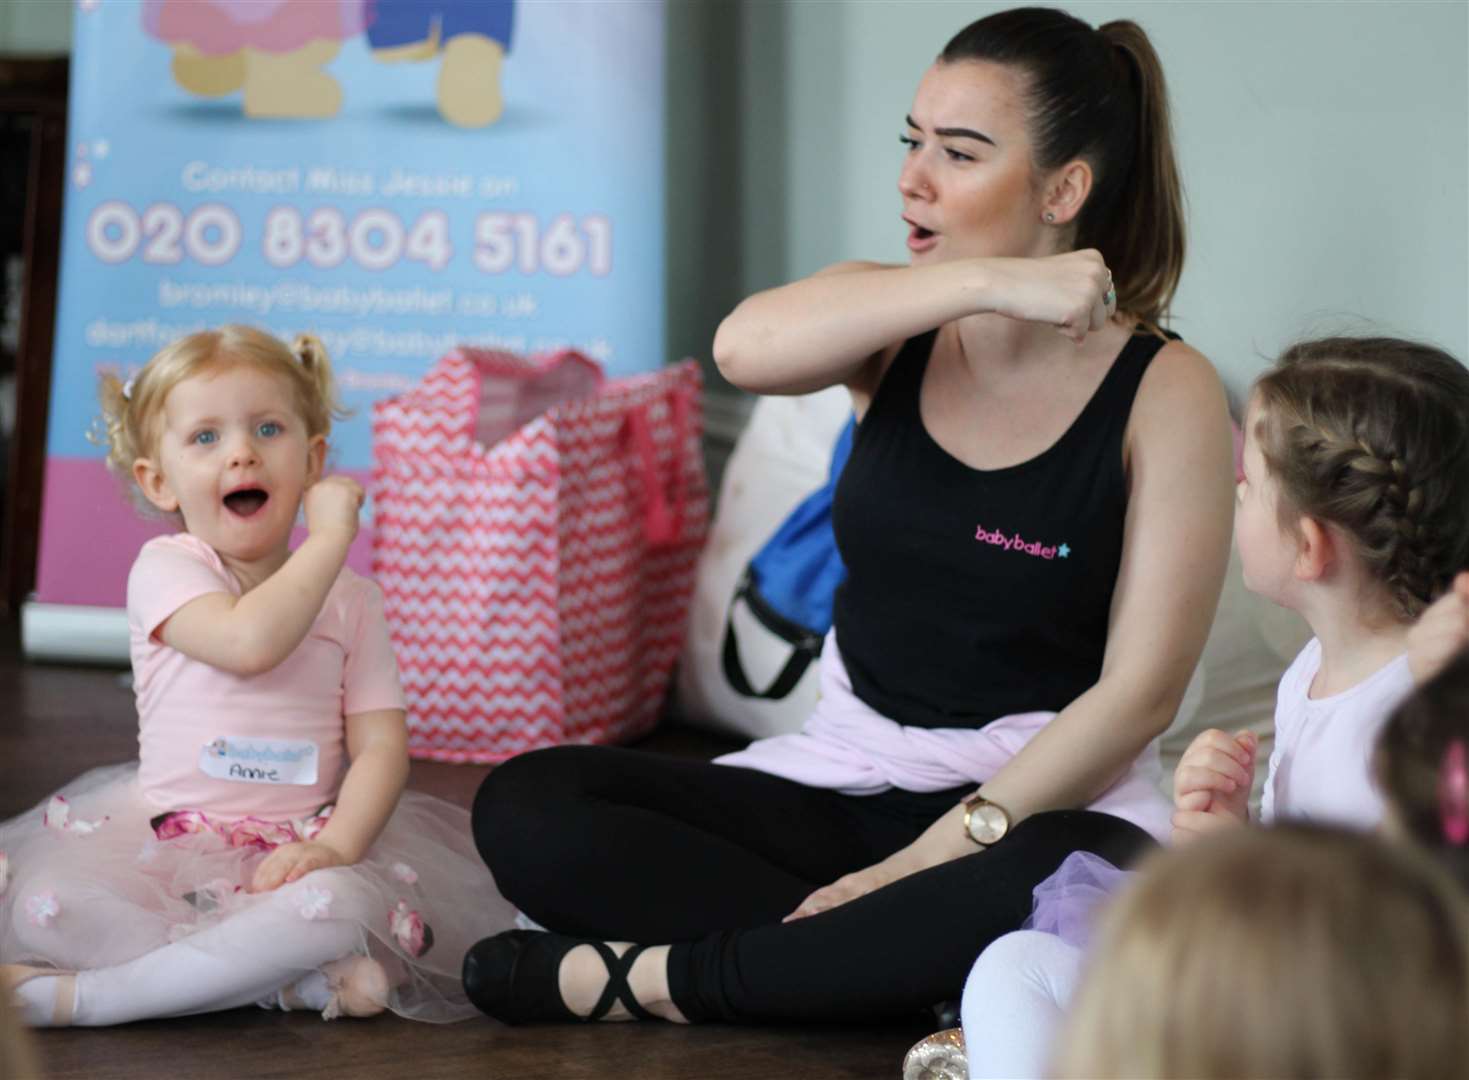 Babyballet classes are available for babies from six months upwards